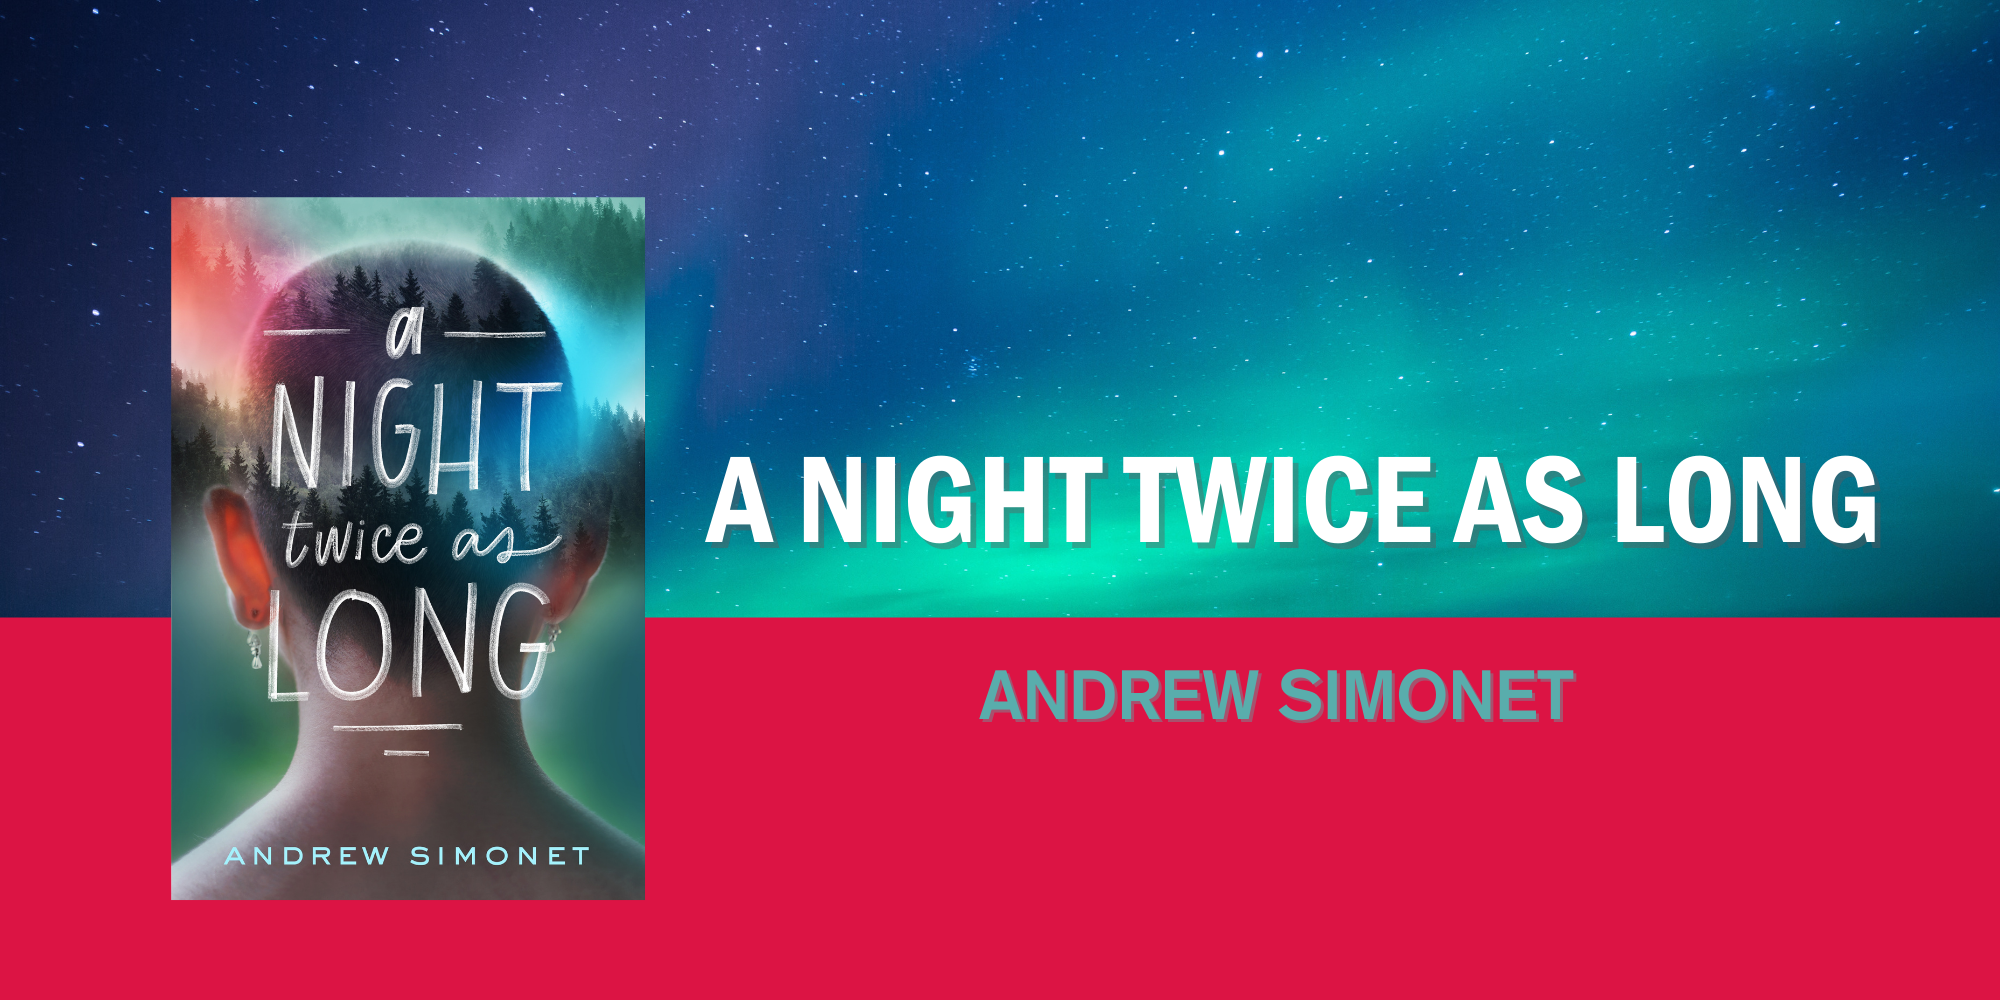 Andrew Simonet on What Inspired A Night Twice As Long